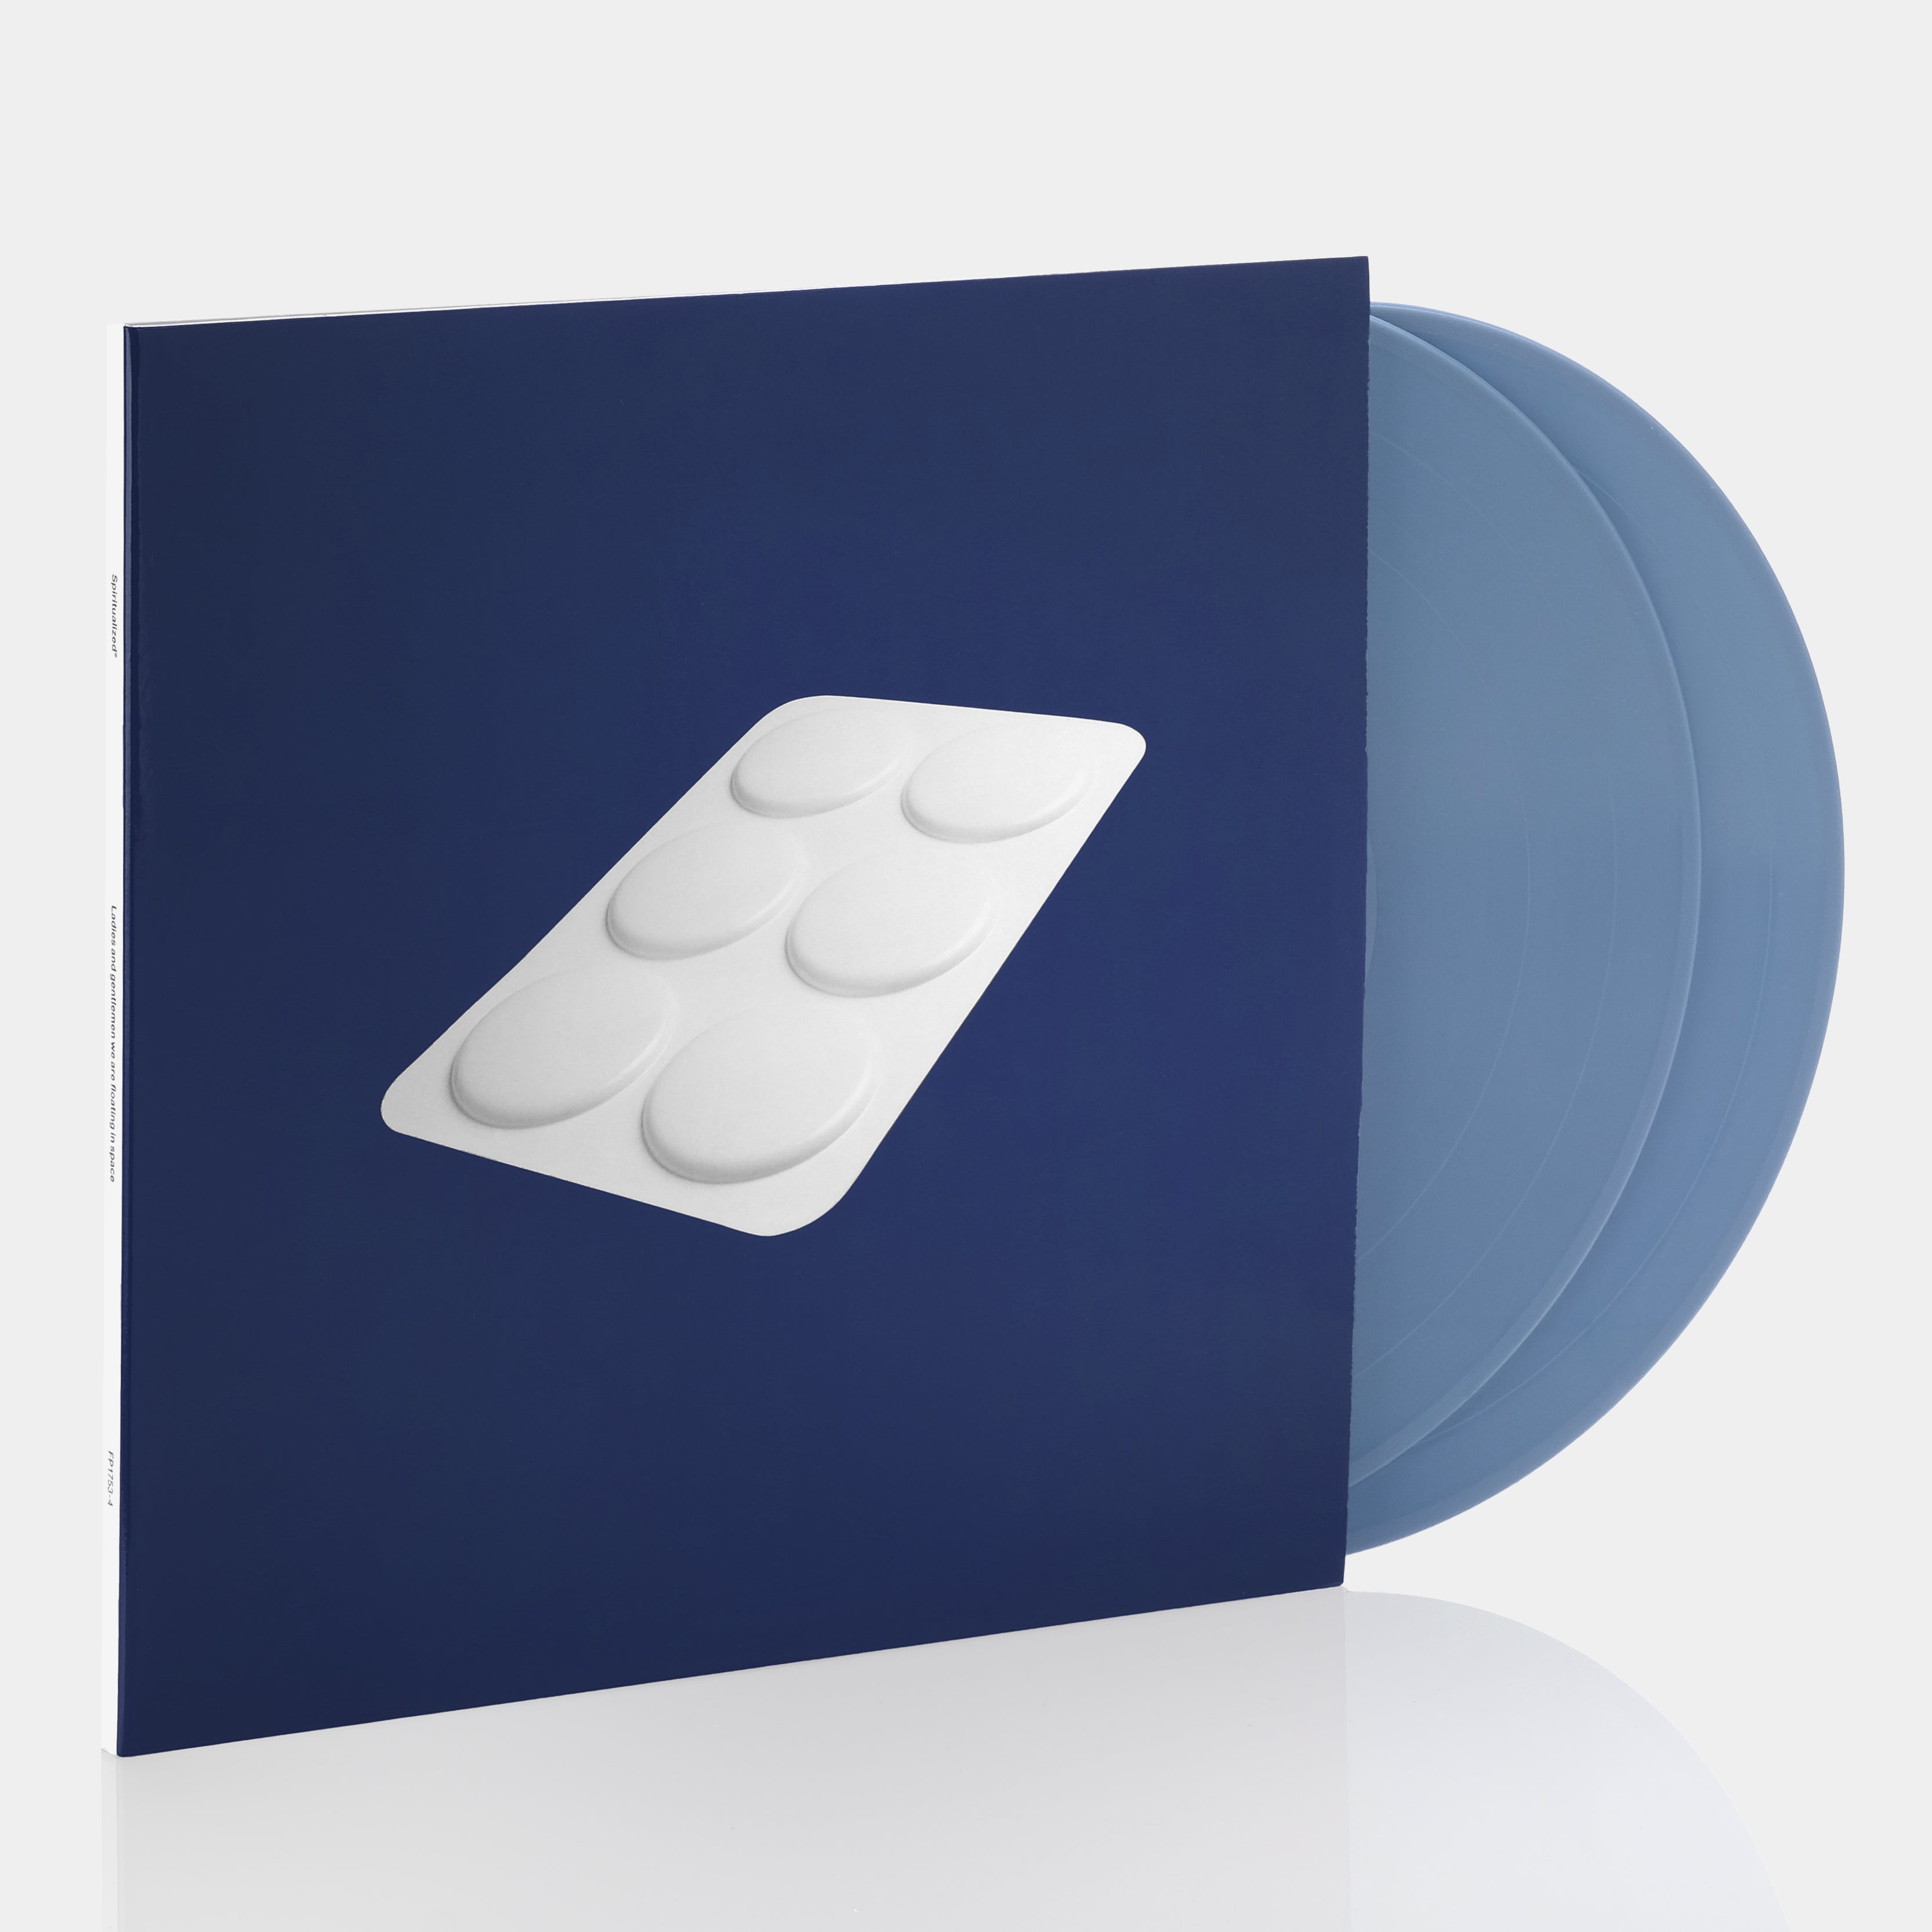 Spiritualized - Ladies and gentlemen we are floating in space 2xLP Neptune Blue Vinyl Record (Damaged Packaging)